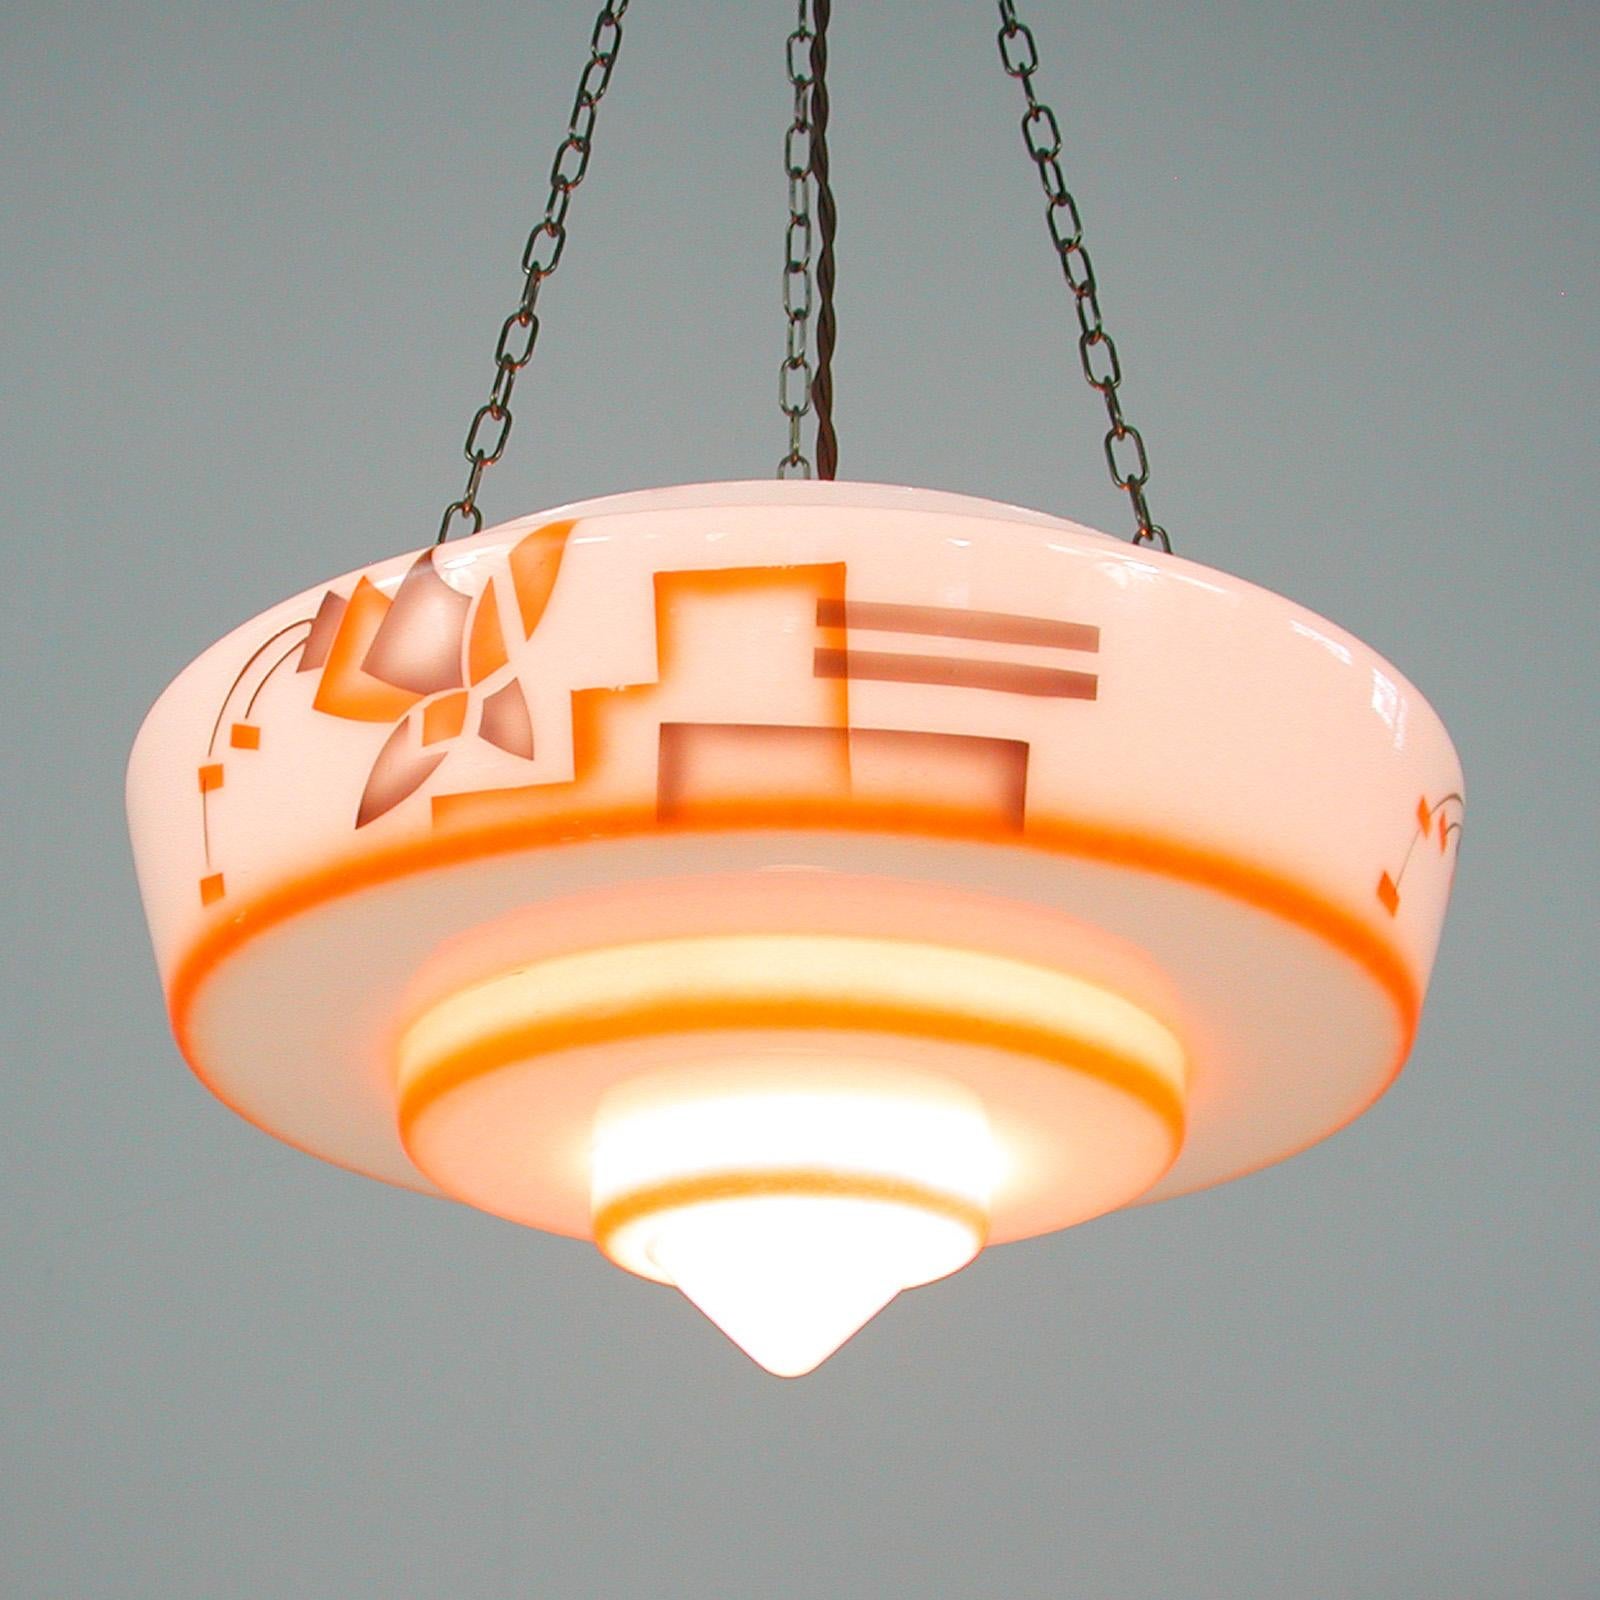 German Art Deco Suspension Light, Enameled Glass and Brass, 1930s For Sale 10